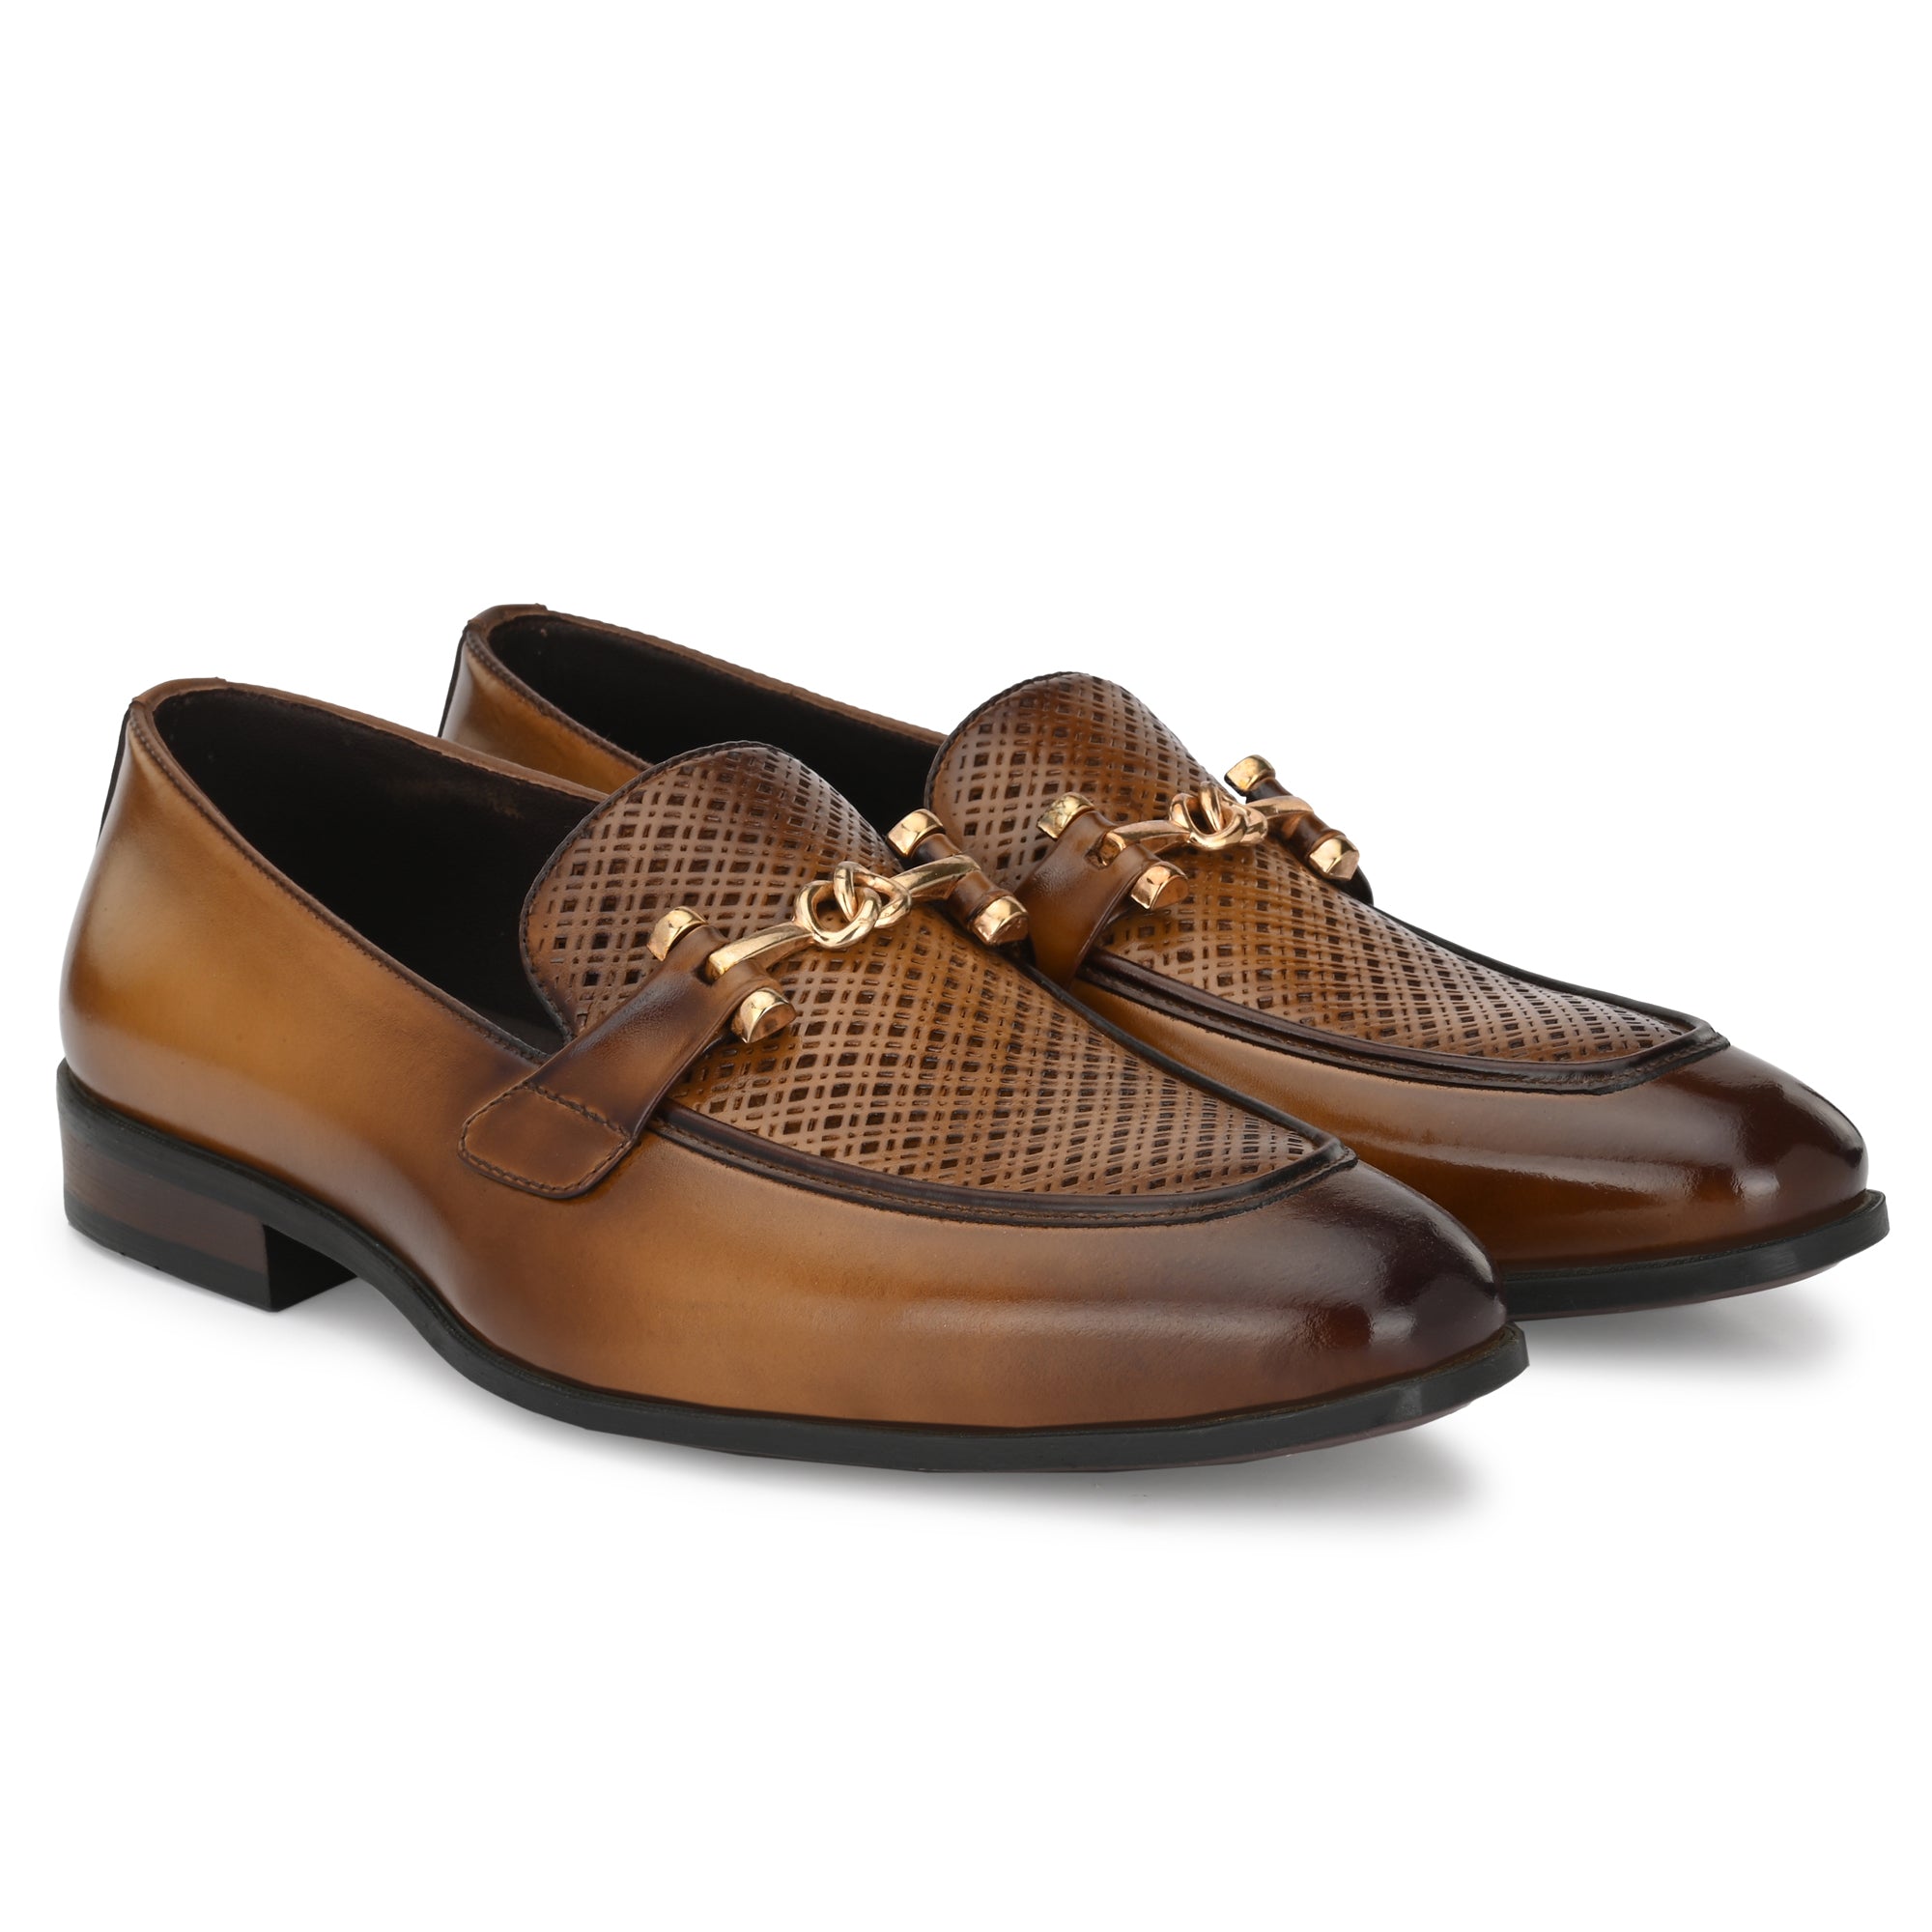 Buckled Formal Loafers For Men by Egoss